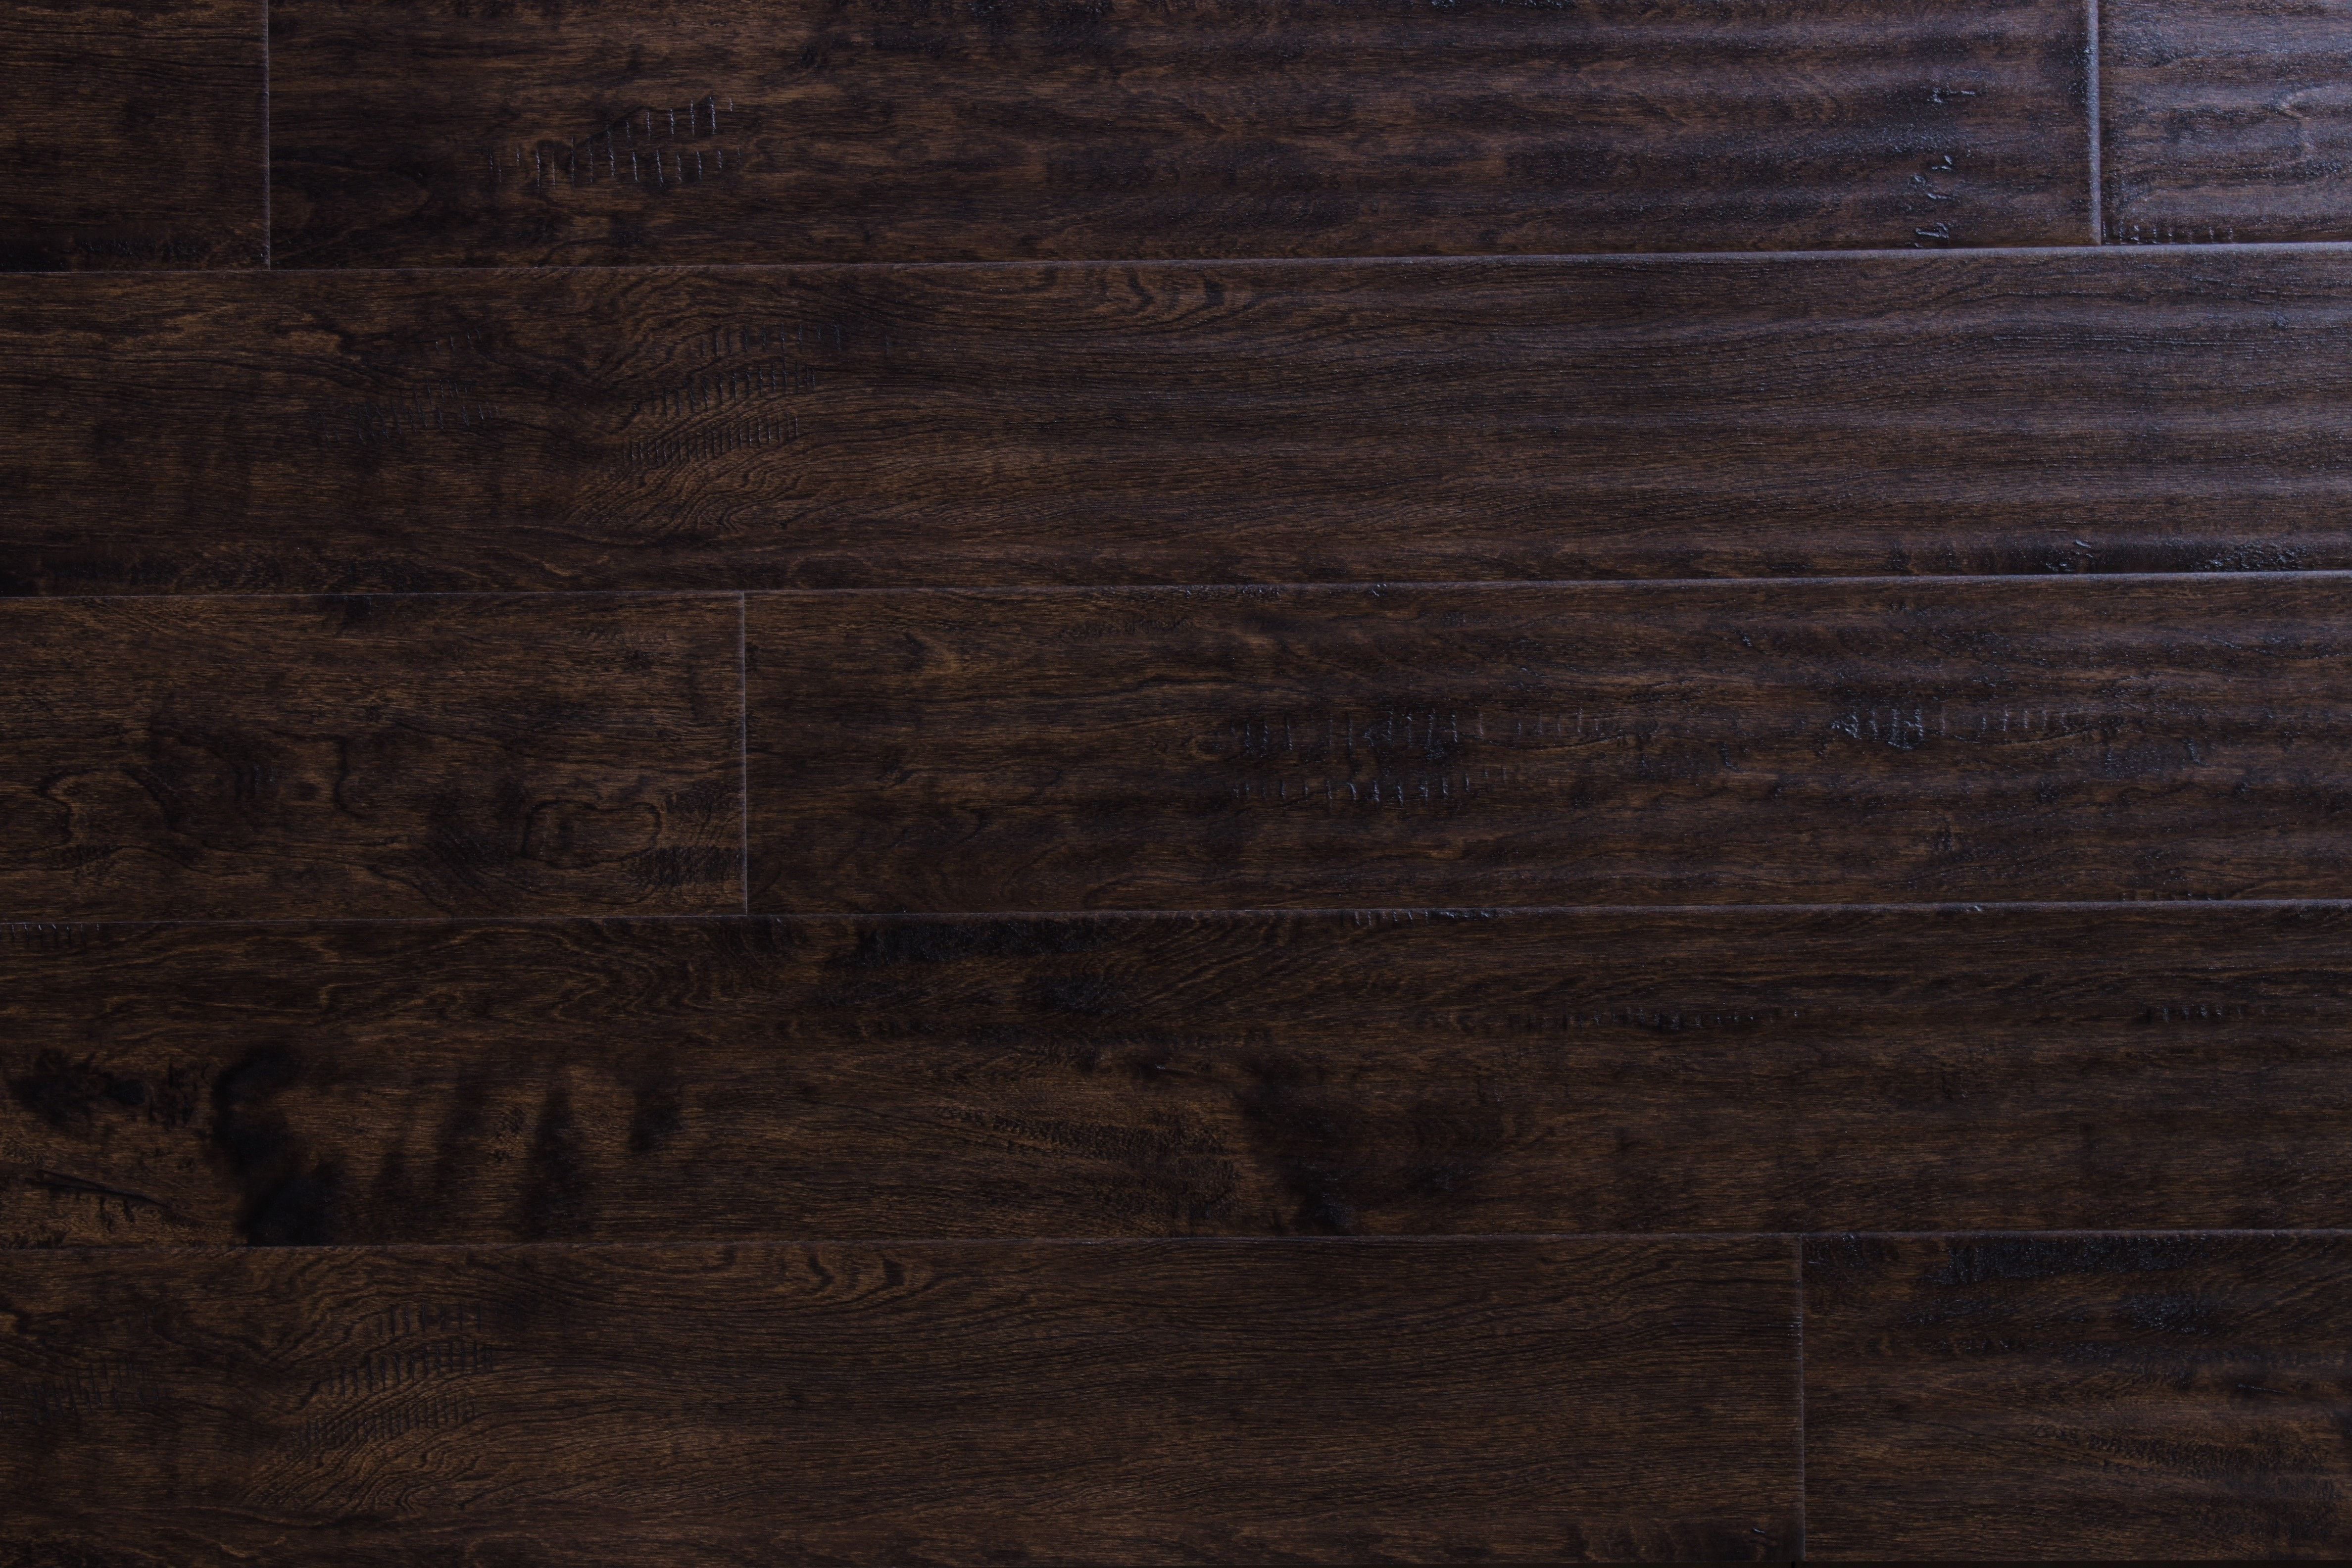 hardwood flooring for sale online of wood flooring free samples available at builddirecta within tailor multi gb 5874277bb8d3c